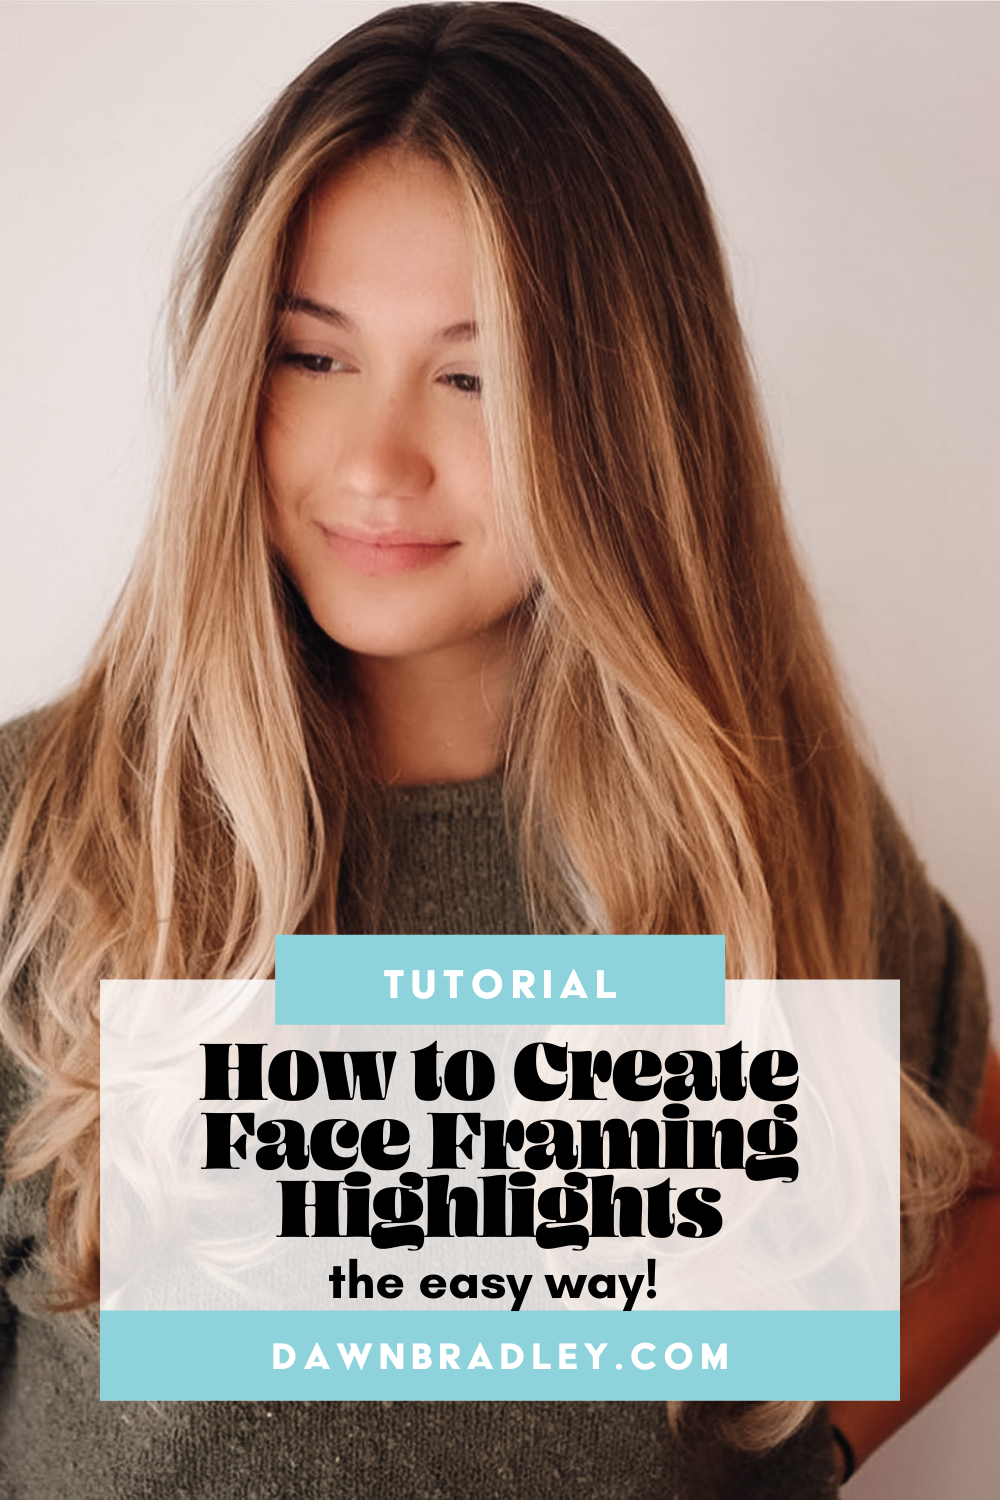 A woman with longe blonde hair stands in front of a white background gazing dreamily off into the distance the text overlay reads "tutorial: how to create face framing highlights the easy way!"